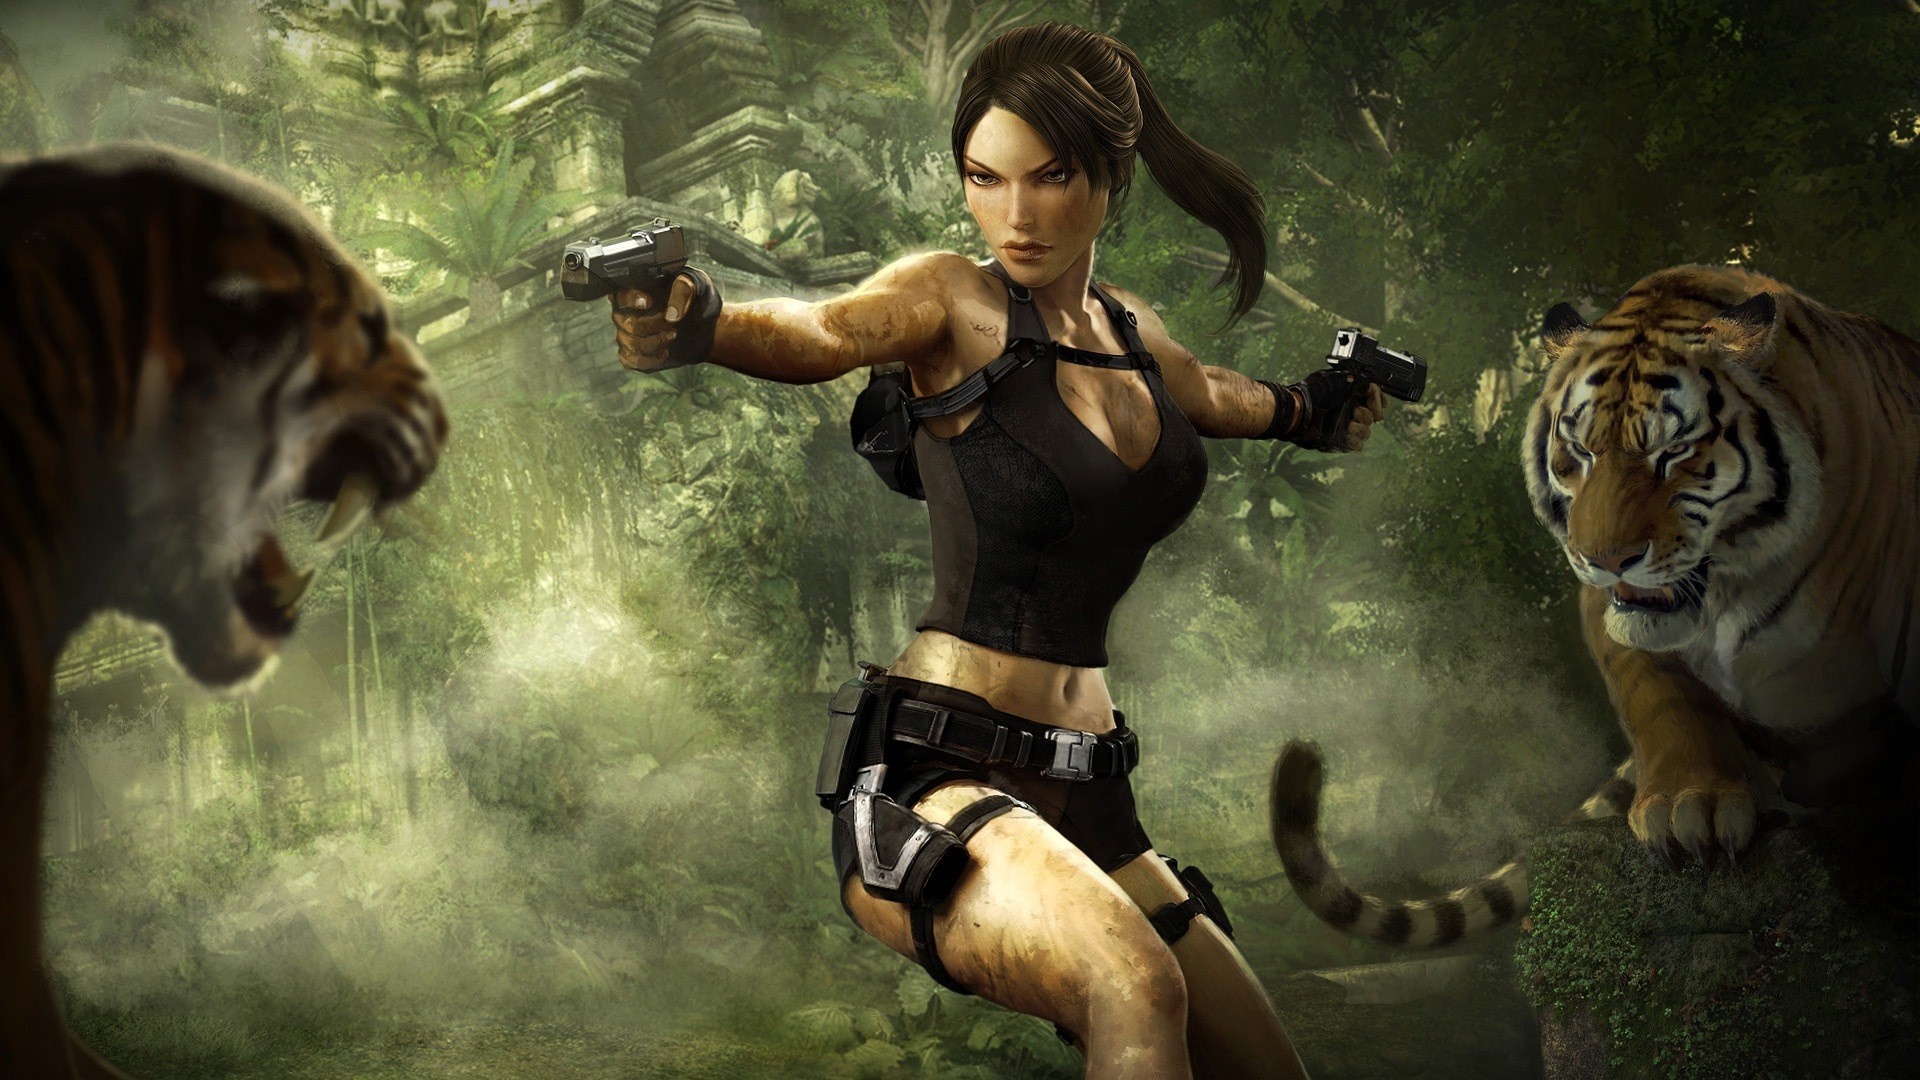 Tomb Raider wallpaper collection, Game-themed backgrounds, Action-packed visuals, Gaming universe, 1920x1080 Full HD Desktop